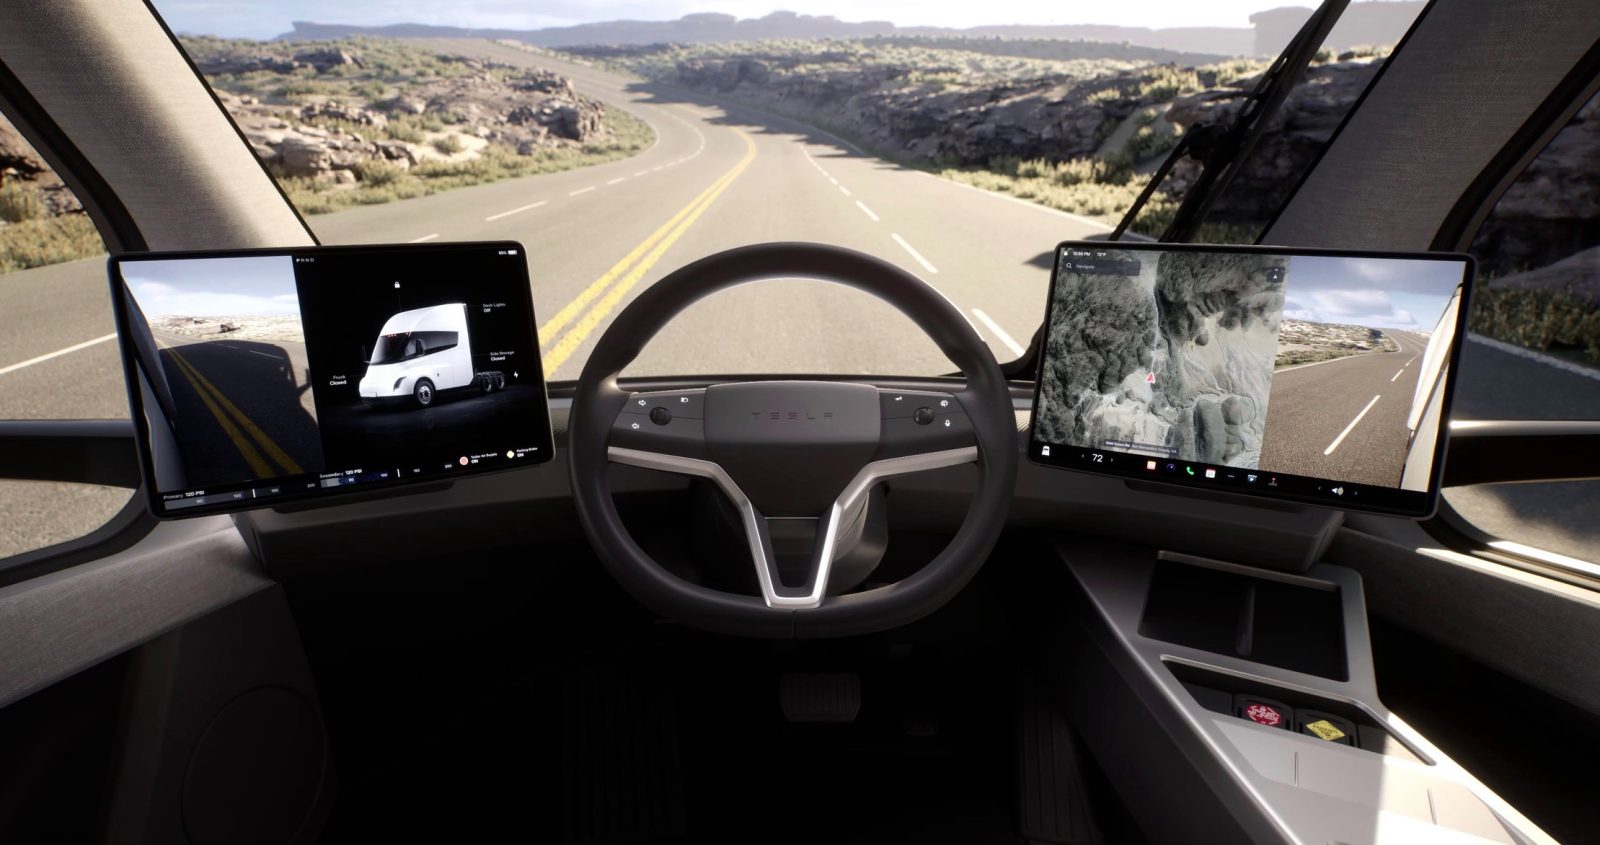 Tesla did not say a word about the Tesla Semi being equipped with autopilot/self-driving